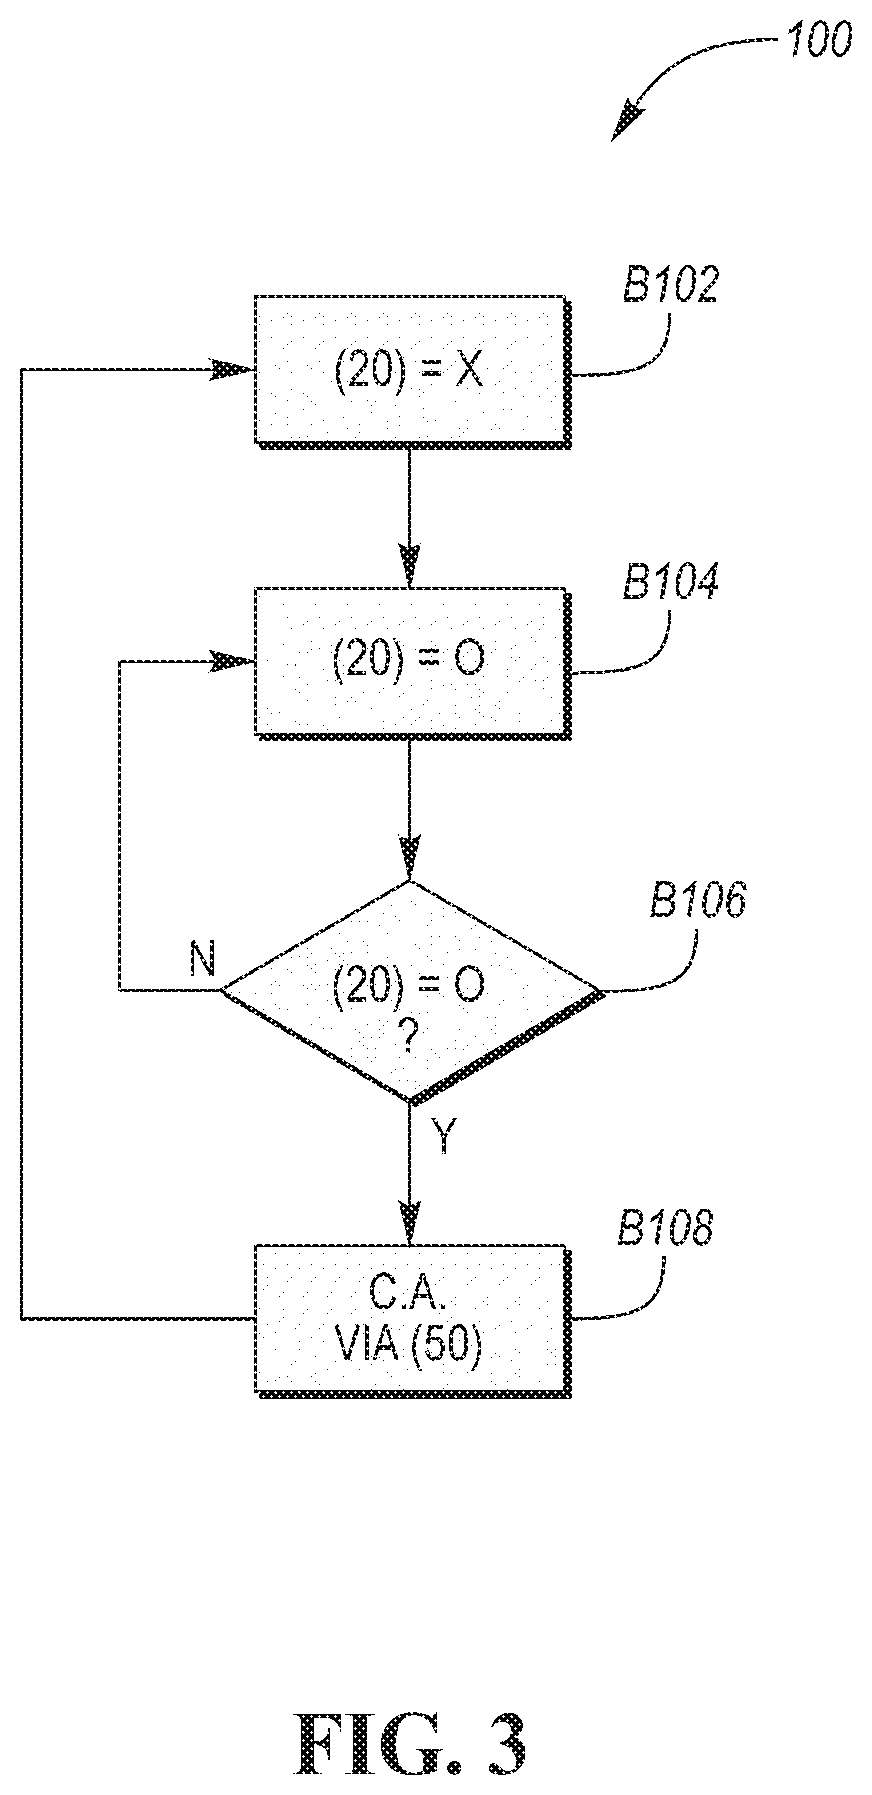 Electrical system with high-voltage system lockout function